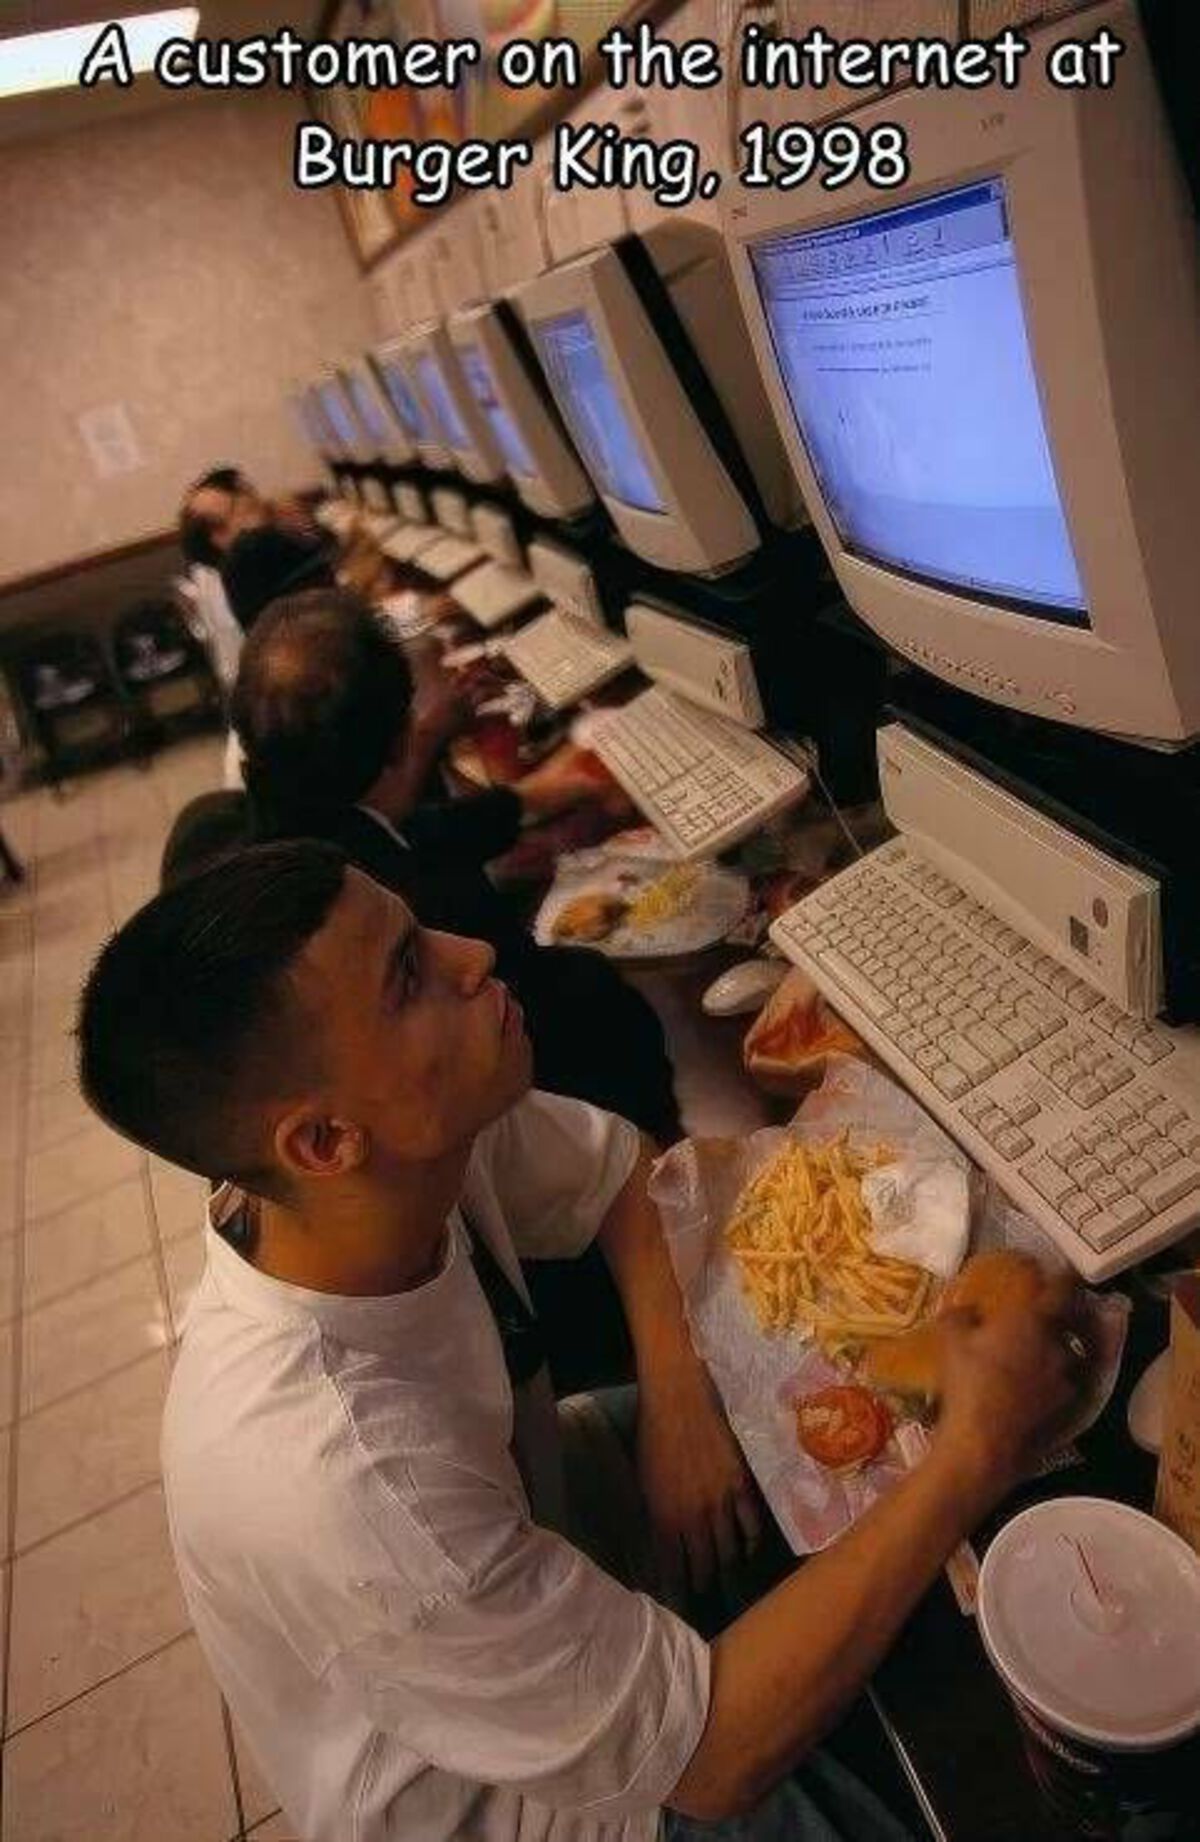 screen - A customer on the internet at Burger King, 1998 An